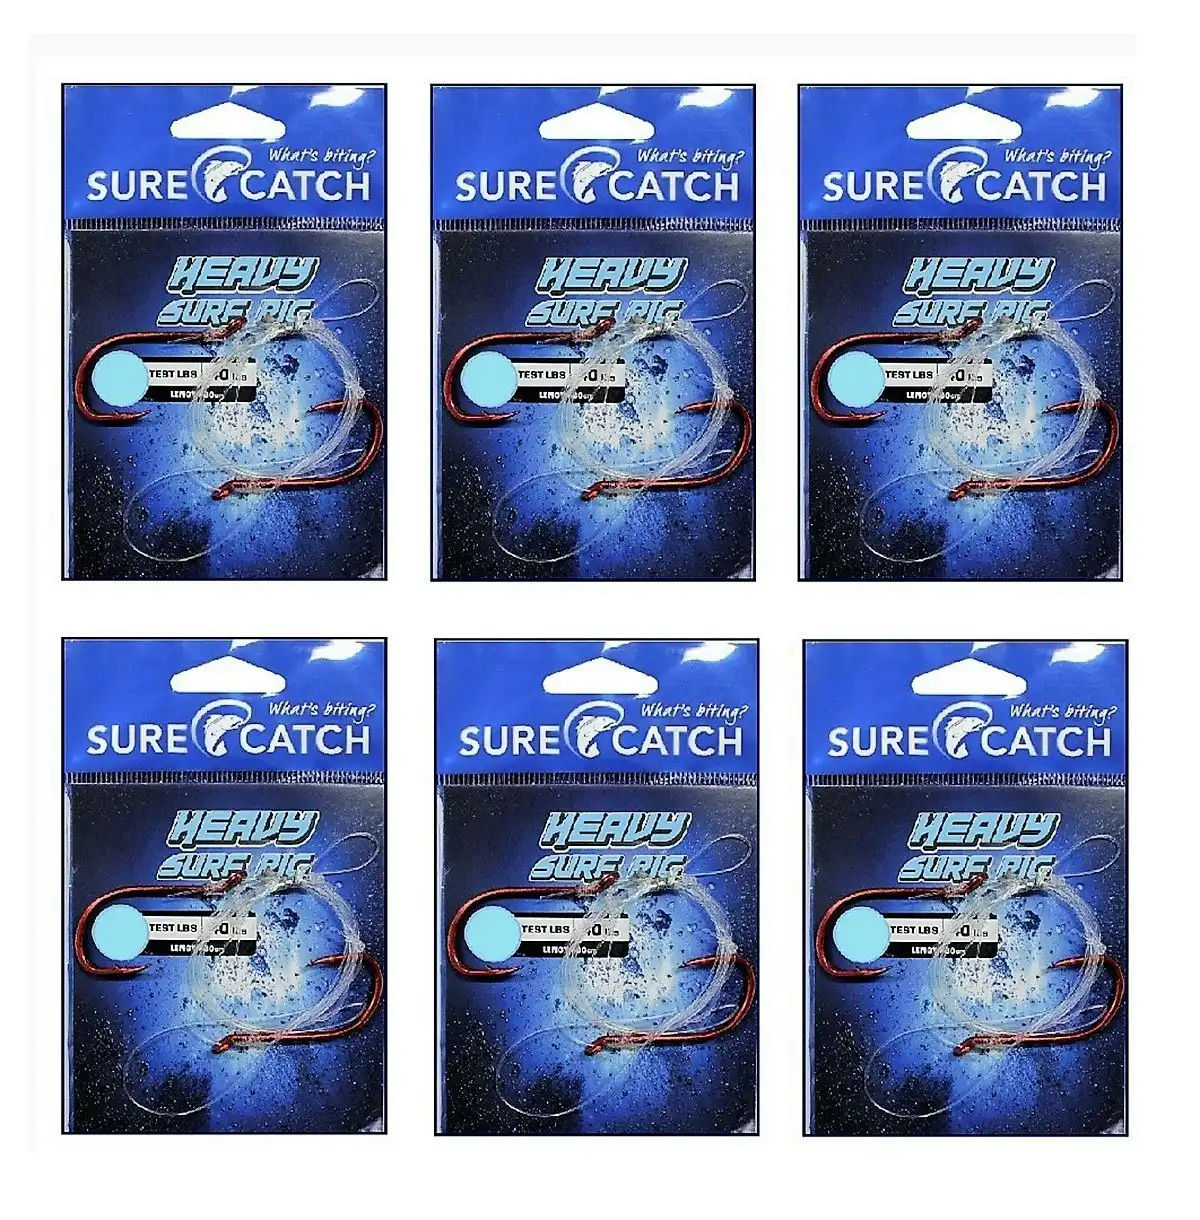 6 Pack of Surecatch Pre-Tied Heavy Surf Rigs with Chemically Sharpened Hooks